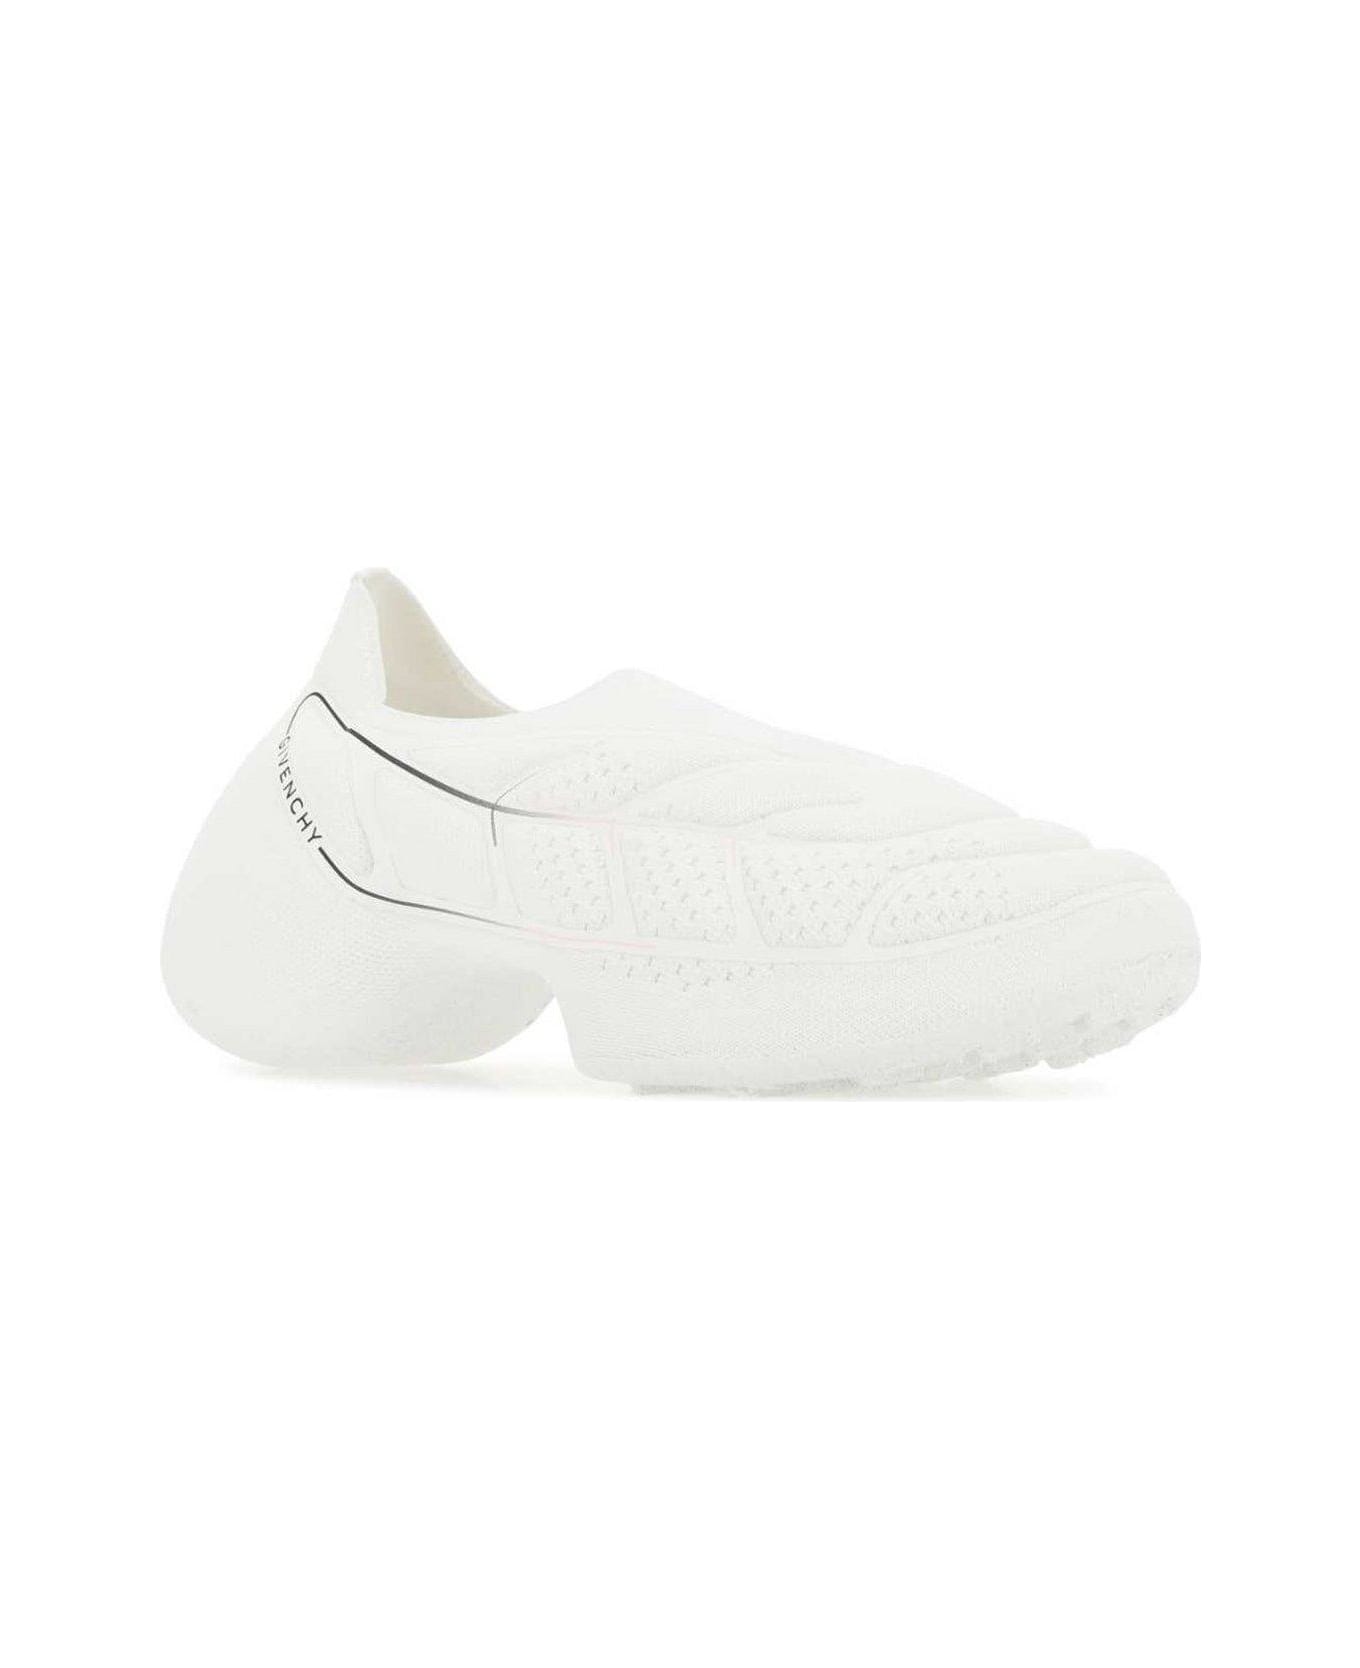 Givenchy Tk-360 Slip-on Sneakers - White